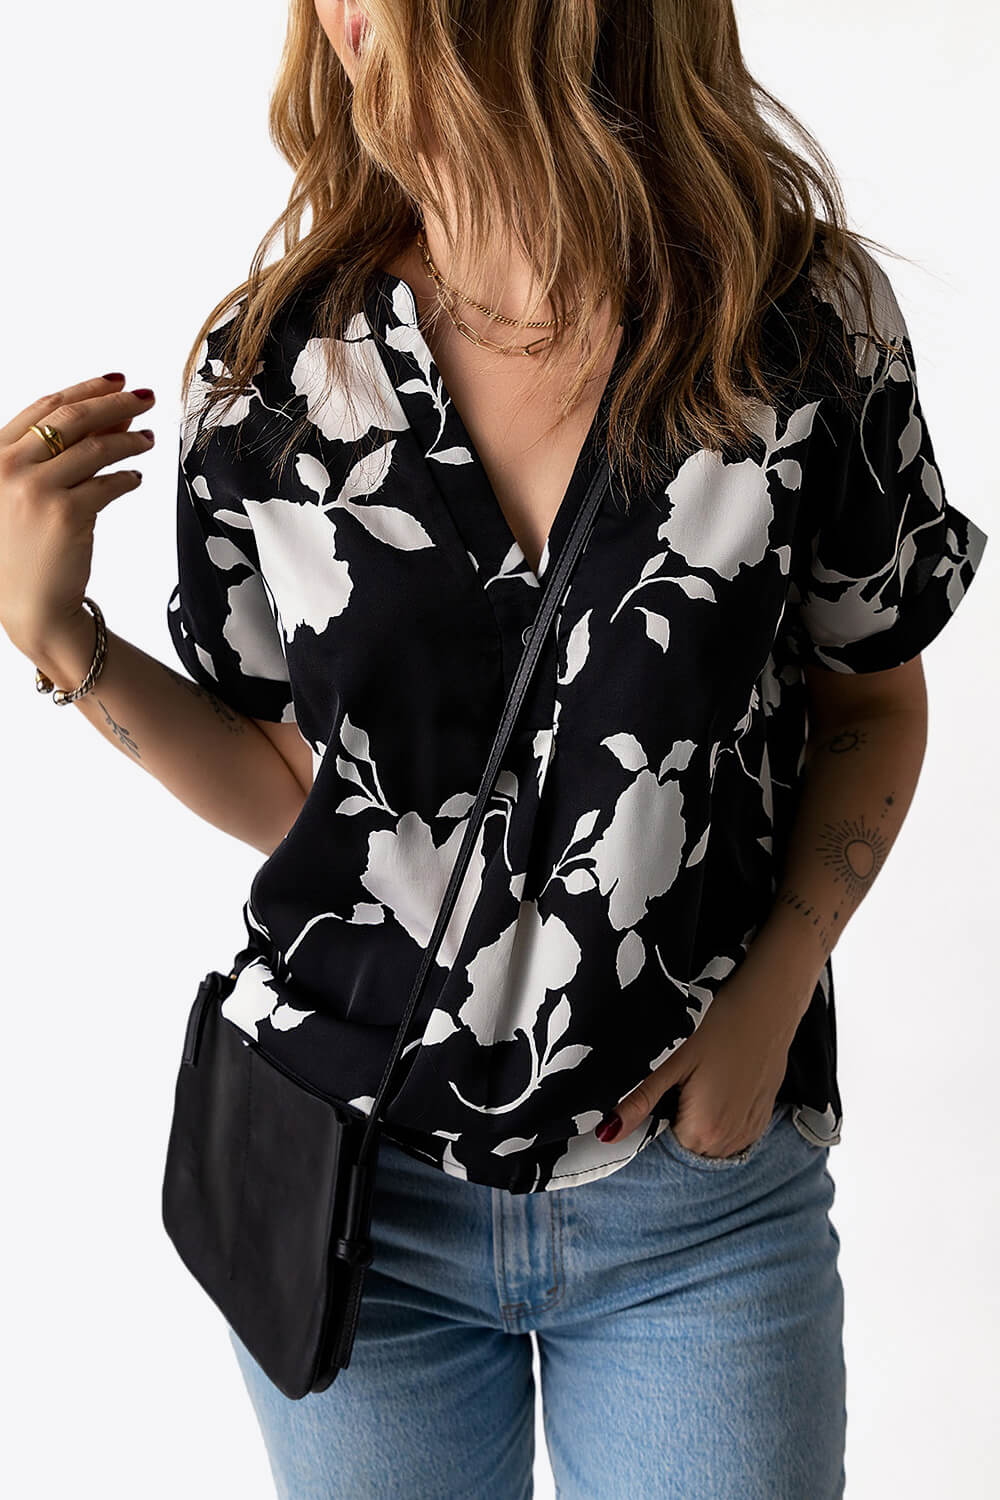 Floral Notched Neck Cuffed Short Sleeve Blouse - Shirts - FITGGINS